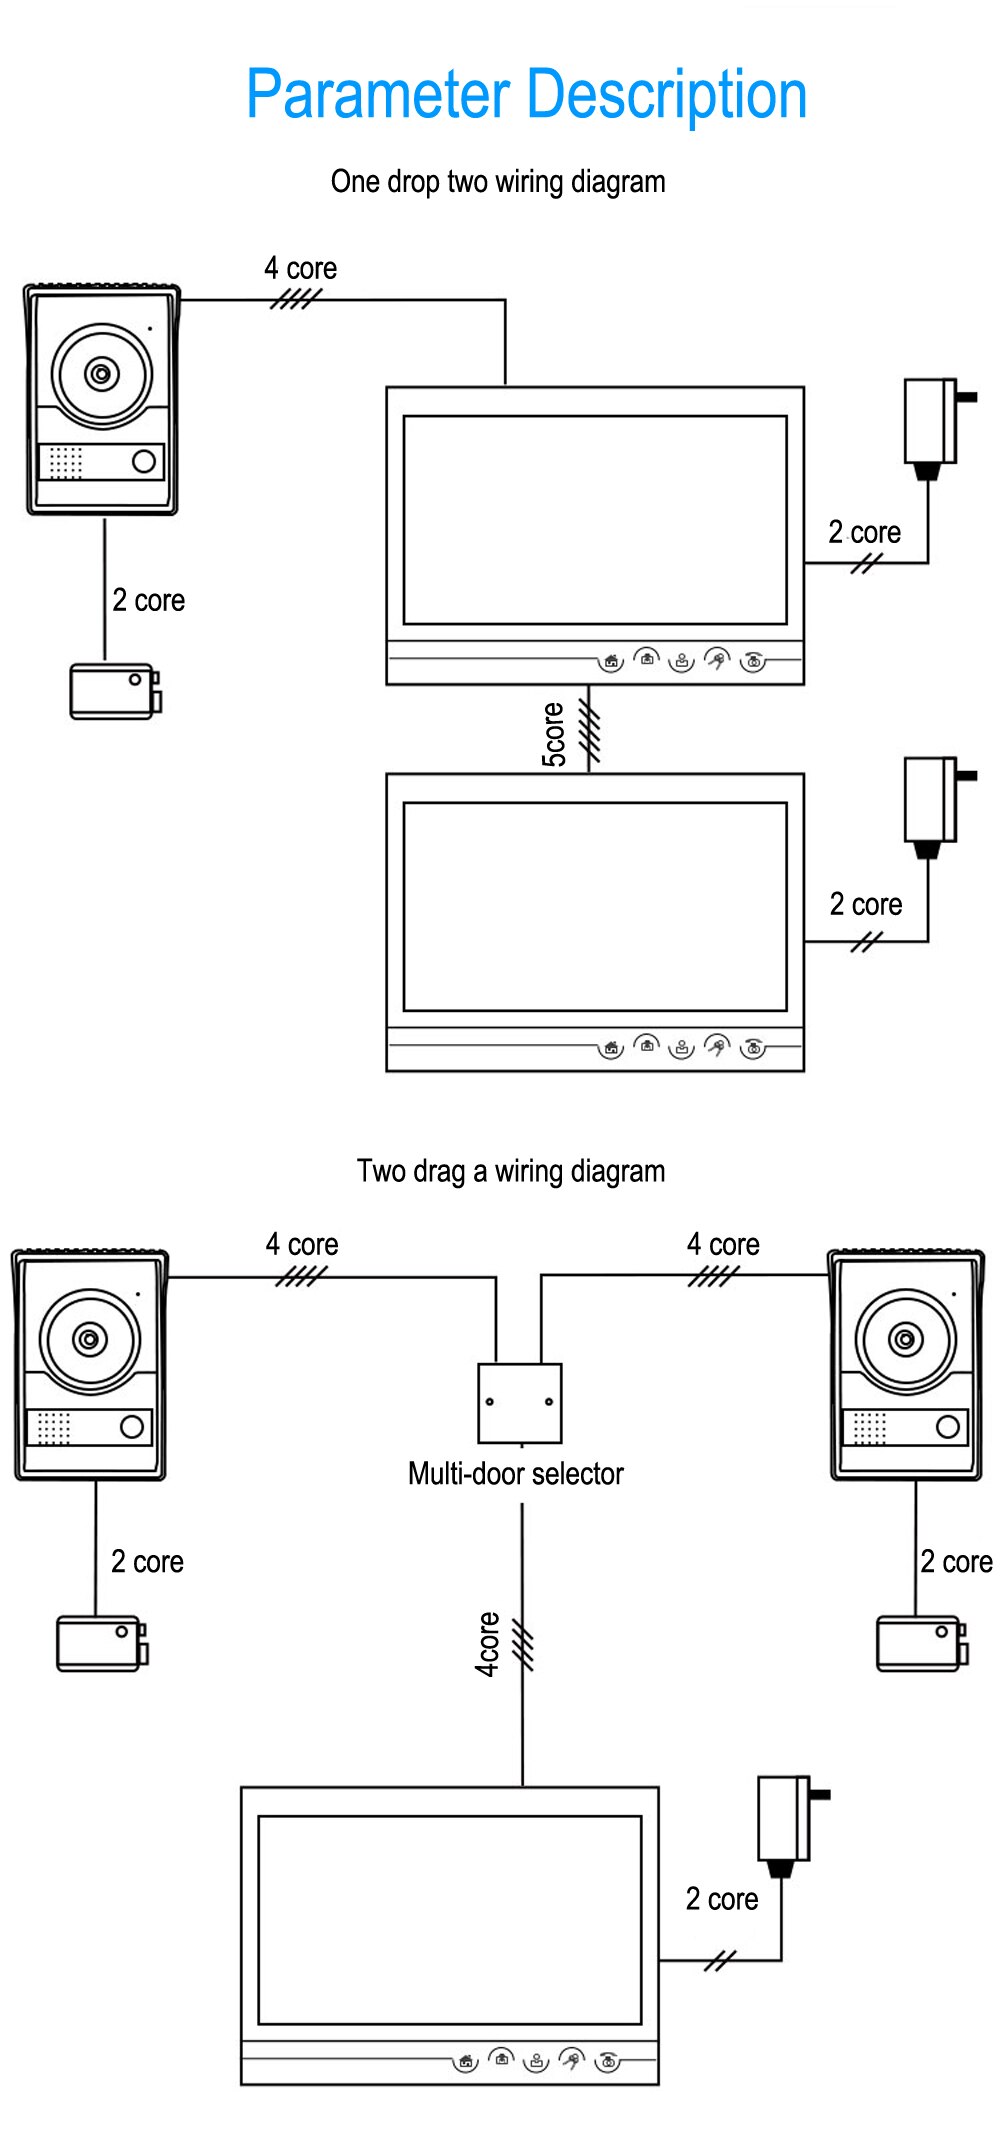 wire diagram 4 Wire Cable Cameras Wired Video Door Phone Intercom Entry System